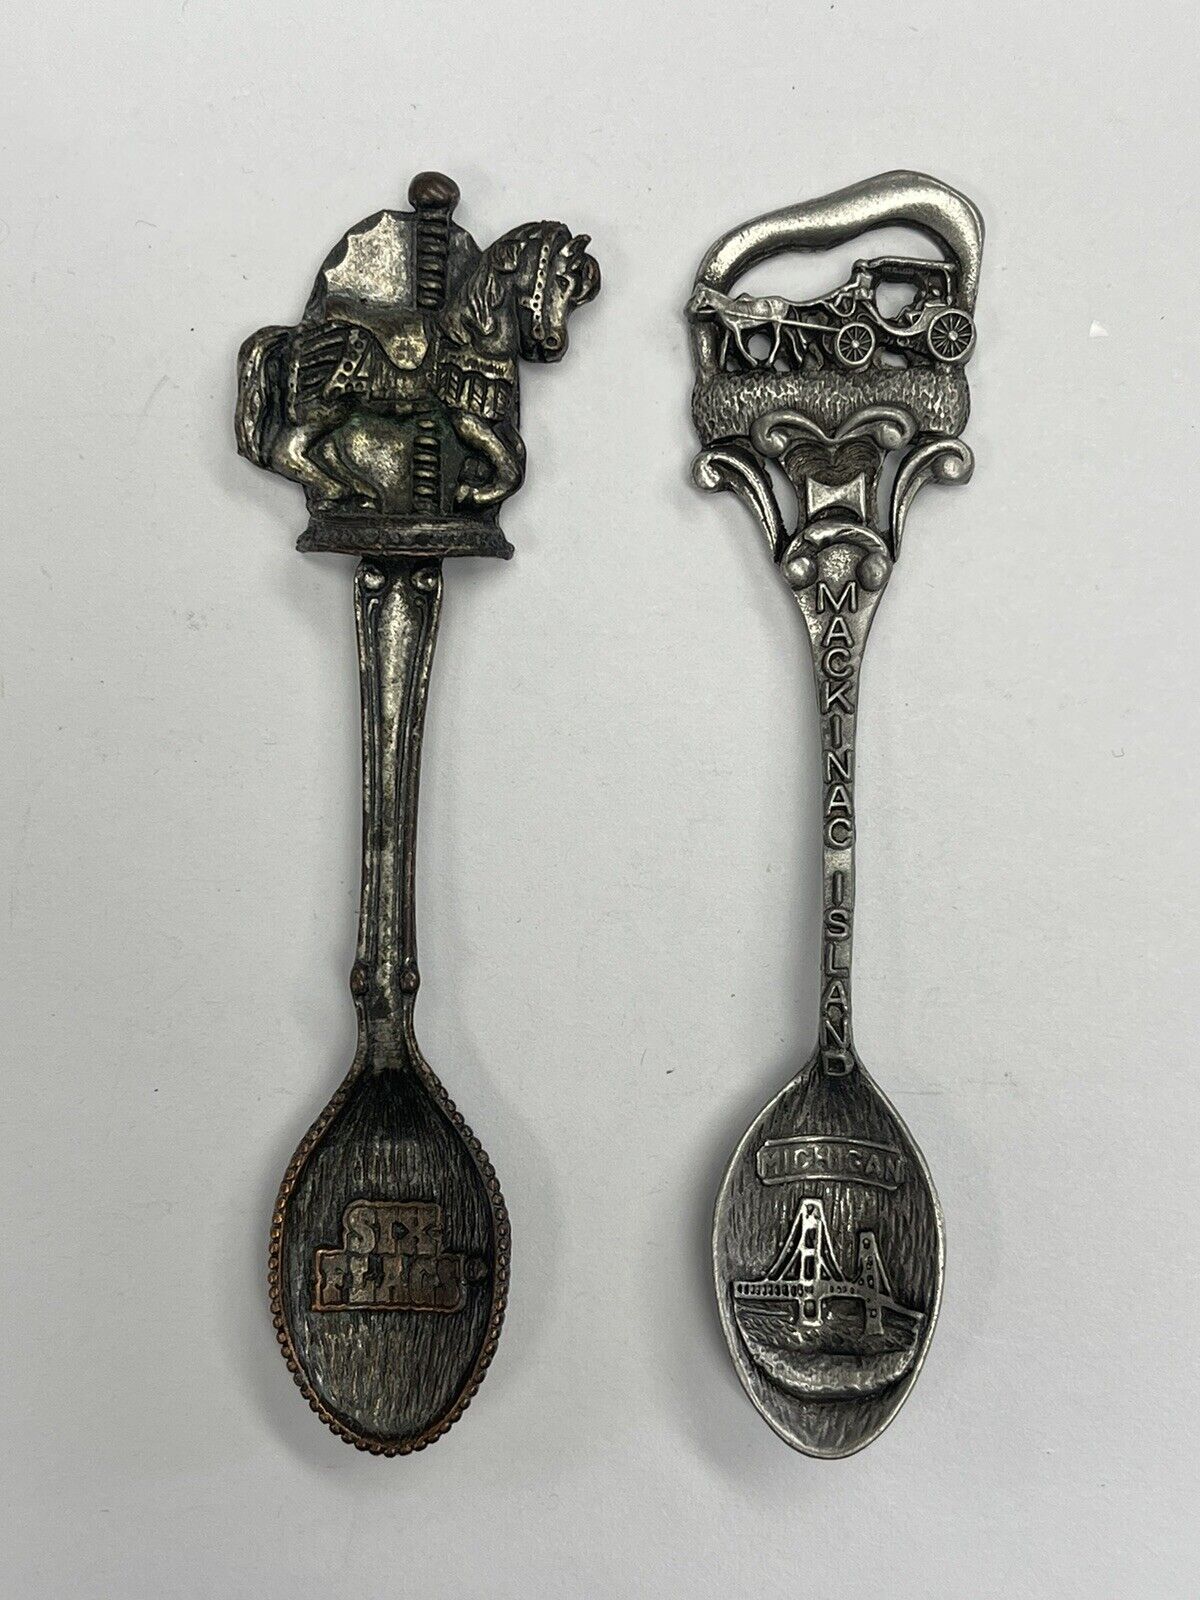 2 Gish Collectible Pewter Spoons. Six Flags ( horse); Michigan/Mackinac Island.